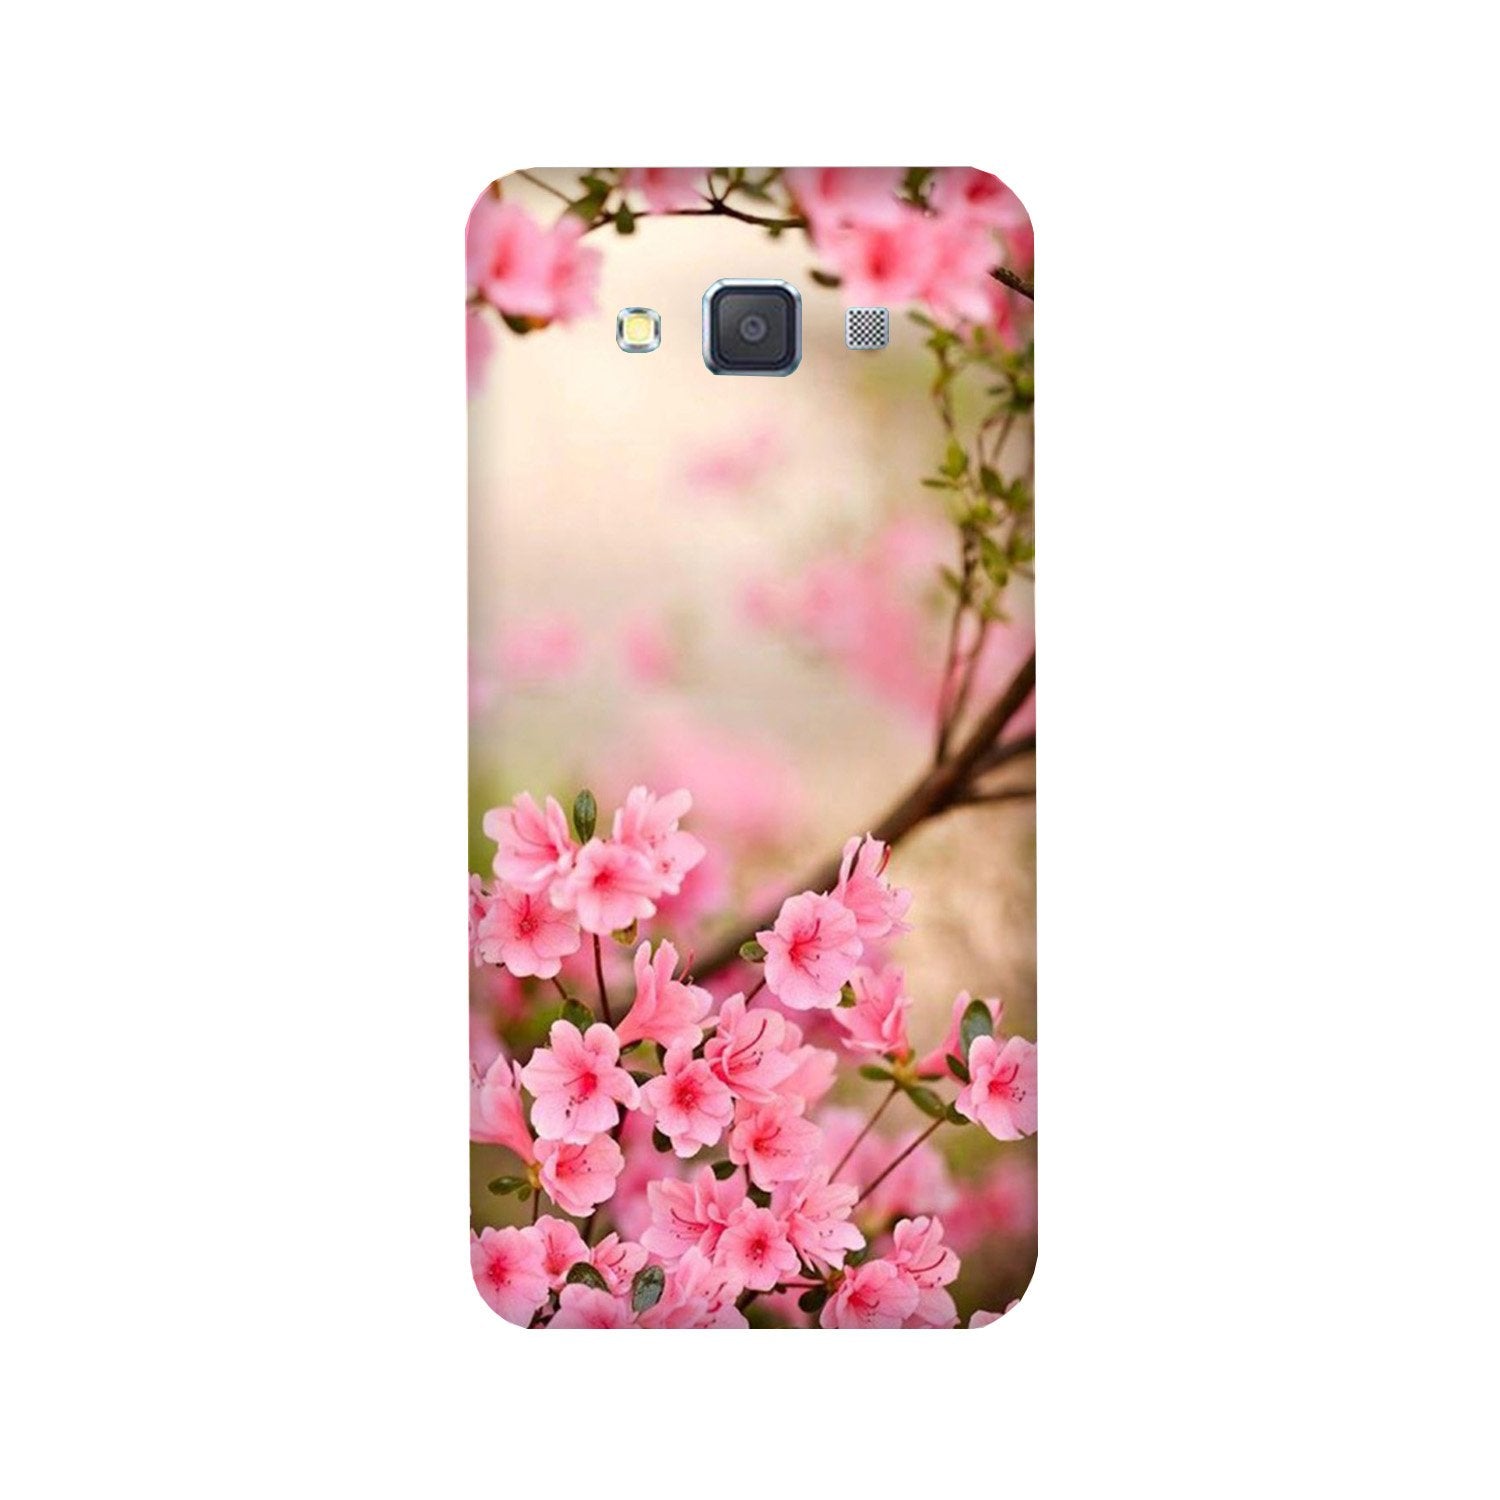 Pink flowers Case for Galaxy Grand Prime